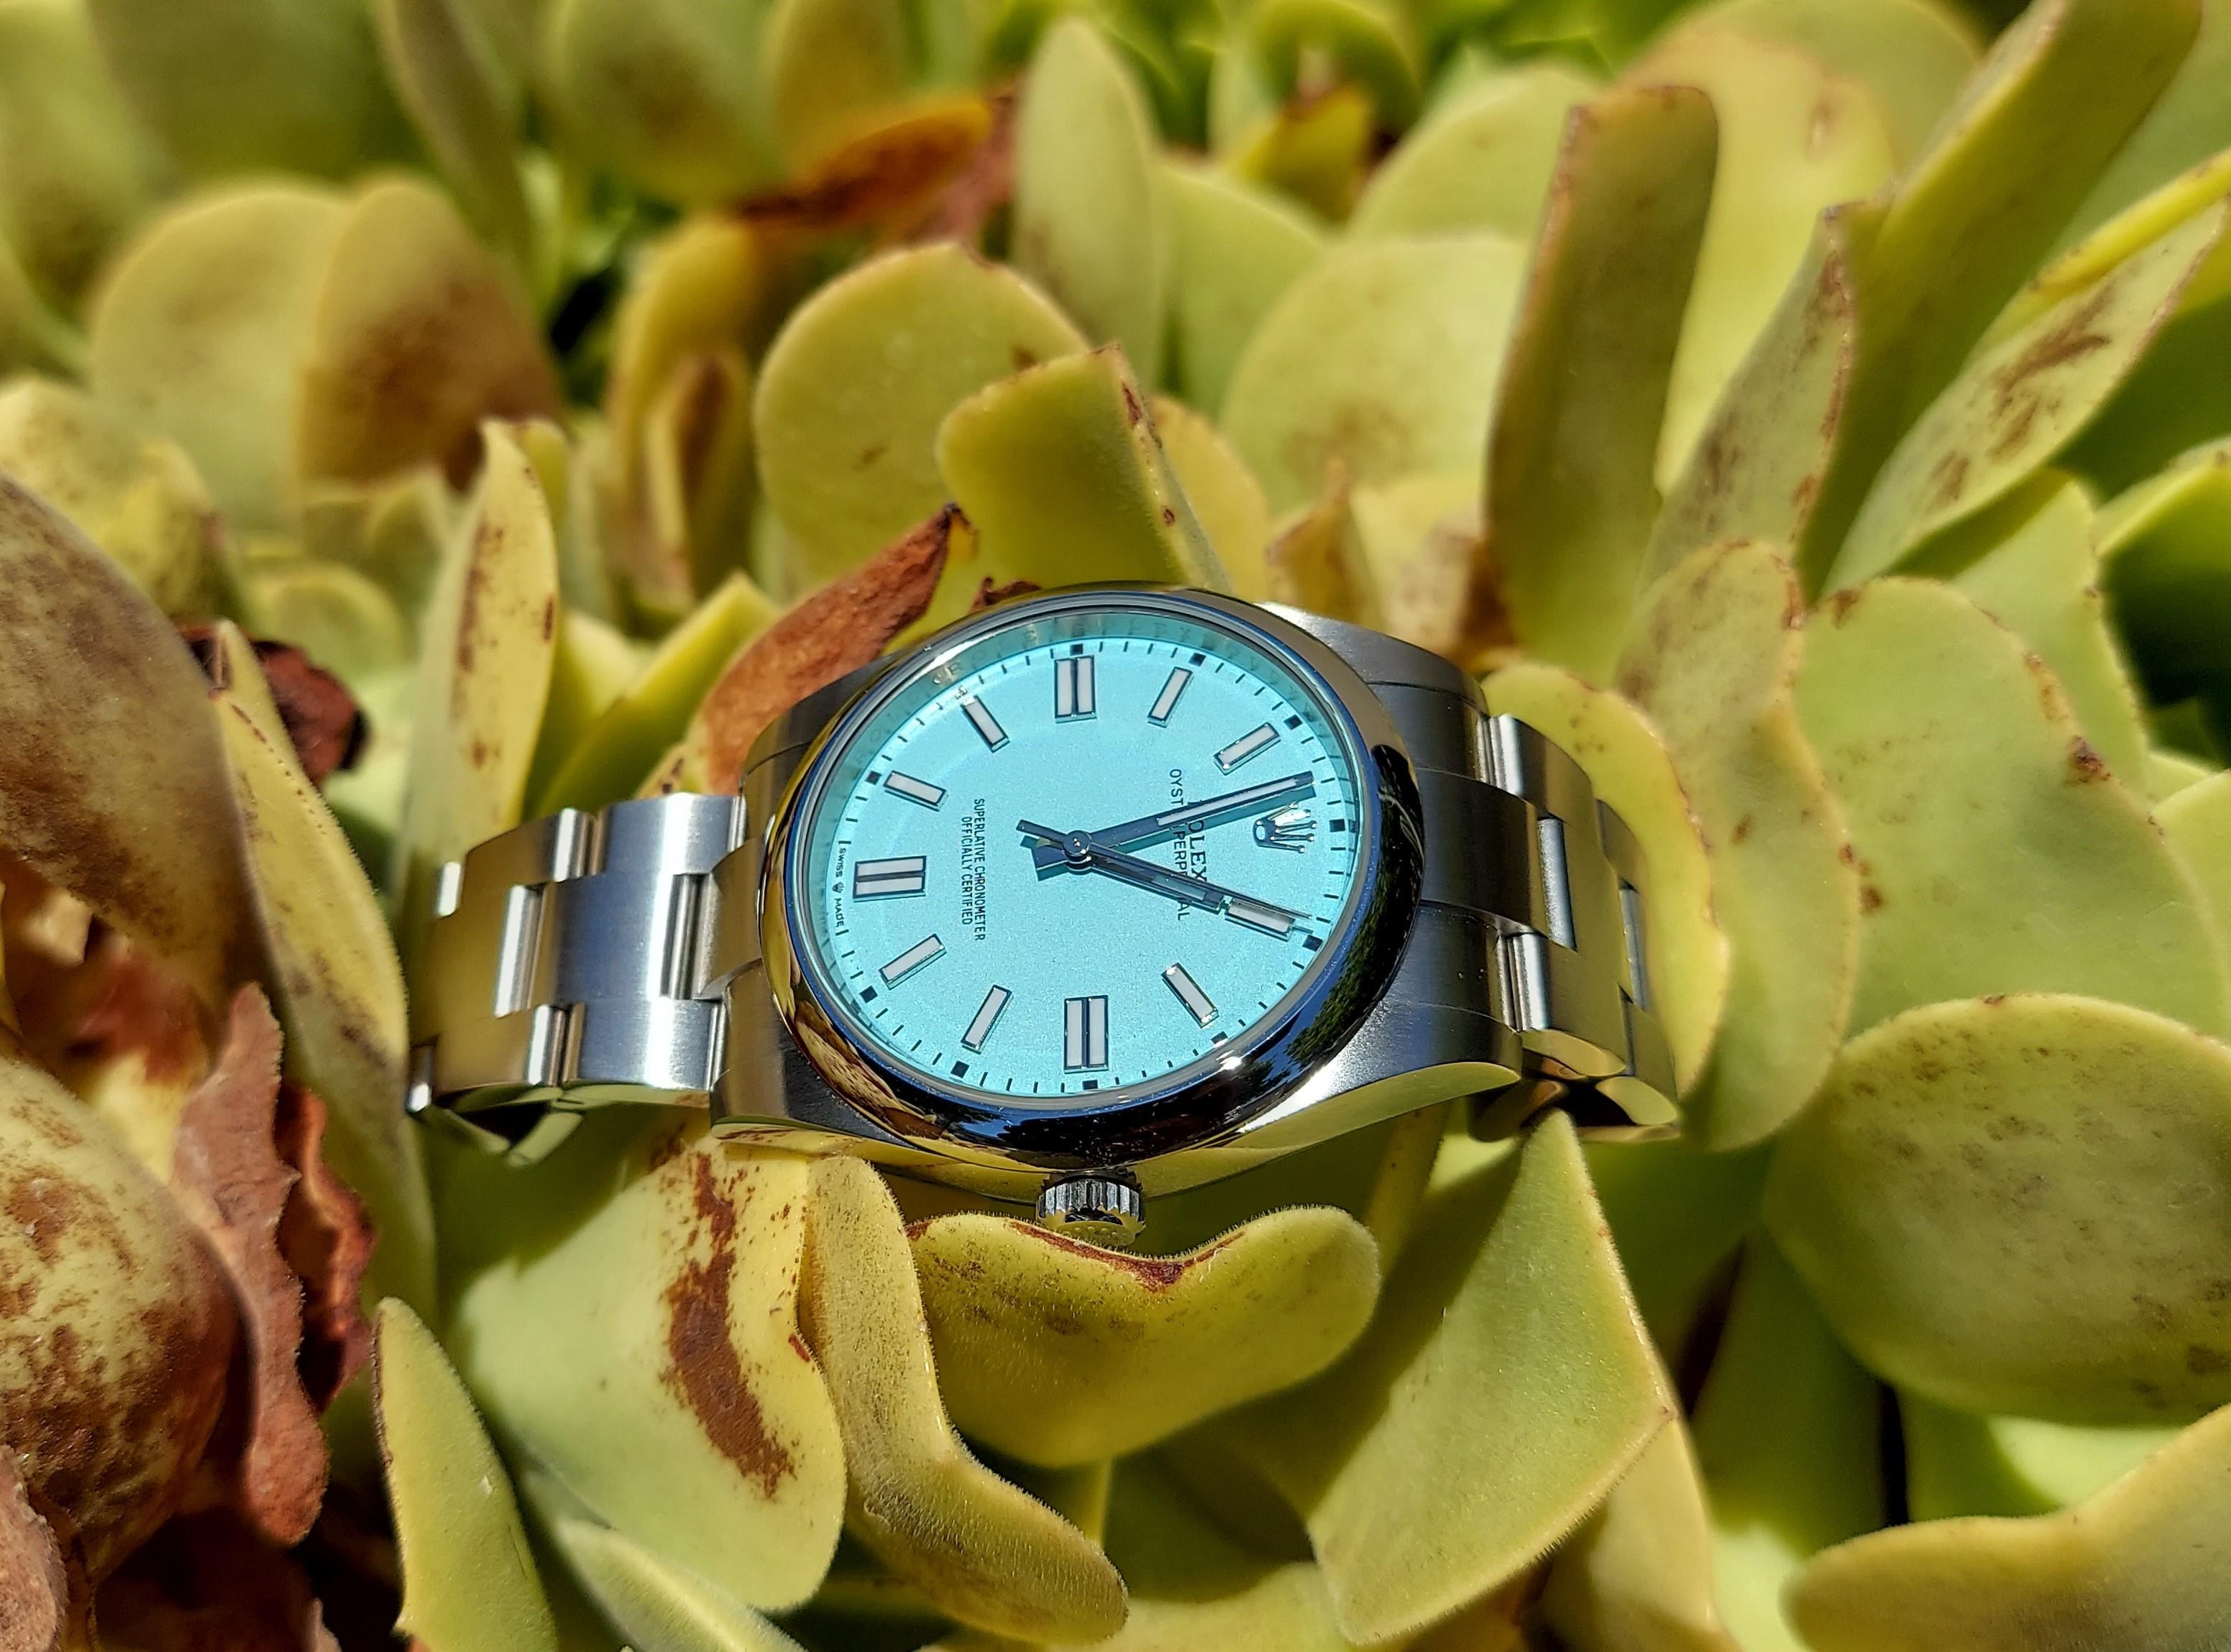 Brand - Rolex
Model - 124300
Gender - Unisex
Metals - Stainless steel 
Style - Oyster Perpetual
Case size - 41mm
Dial - Turquoise
Band - Oyster steel
Bezel - Steel Smooth
Movement - Rolex Automatic 
Crystal - Sapphire

